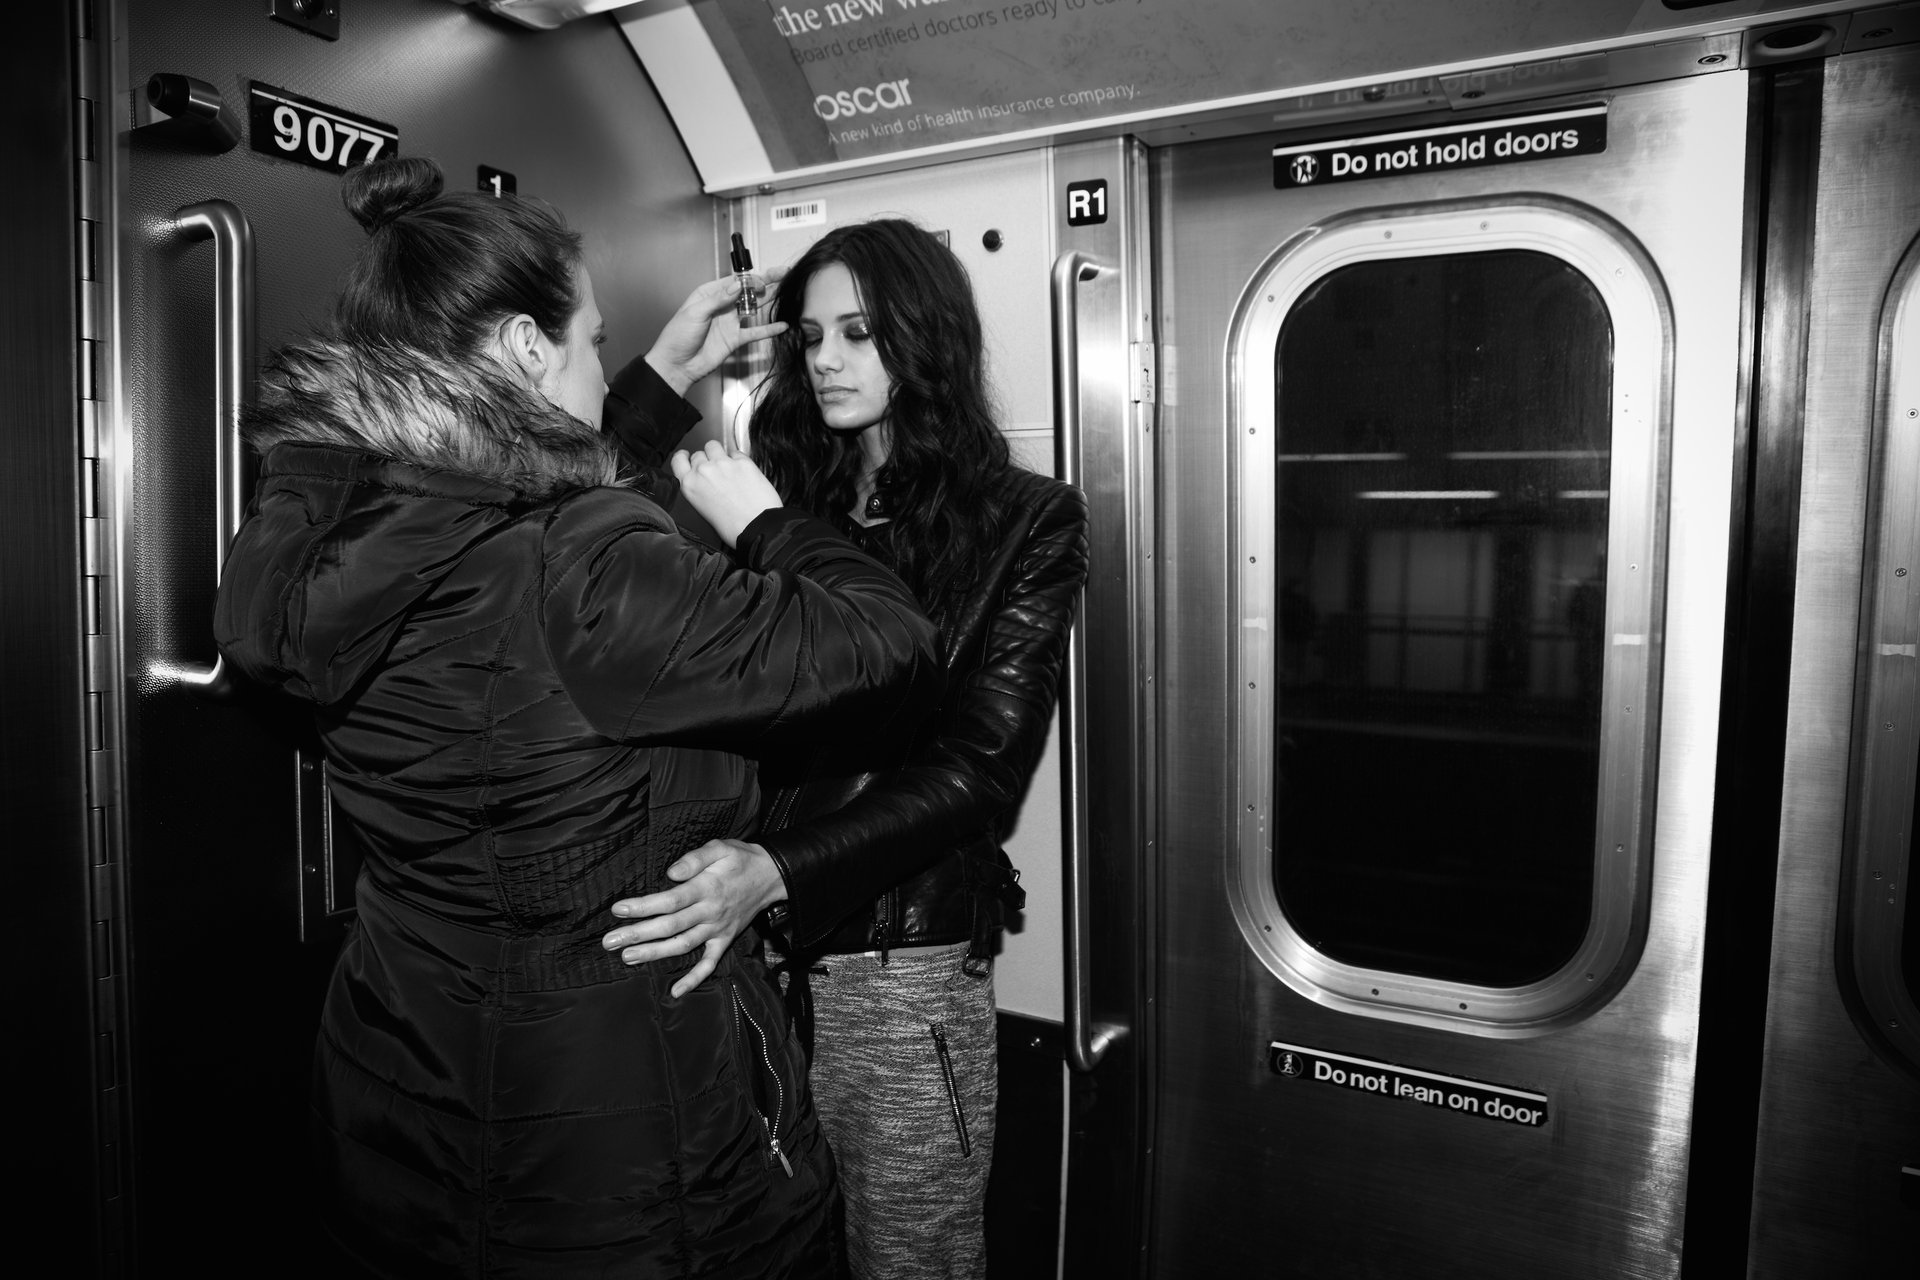 Last touch ups on Anja Leuenberger for a shoot with Thomas Buchwalder in the Subway in New York